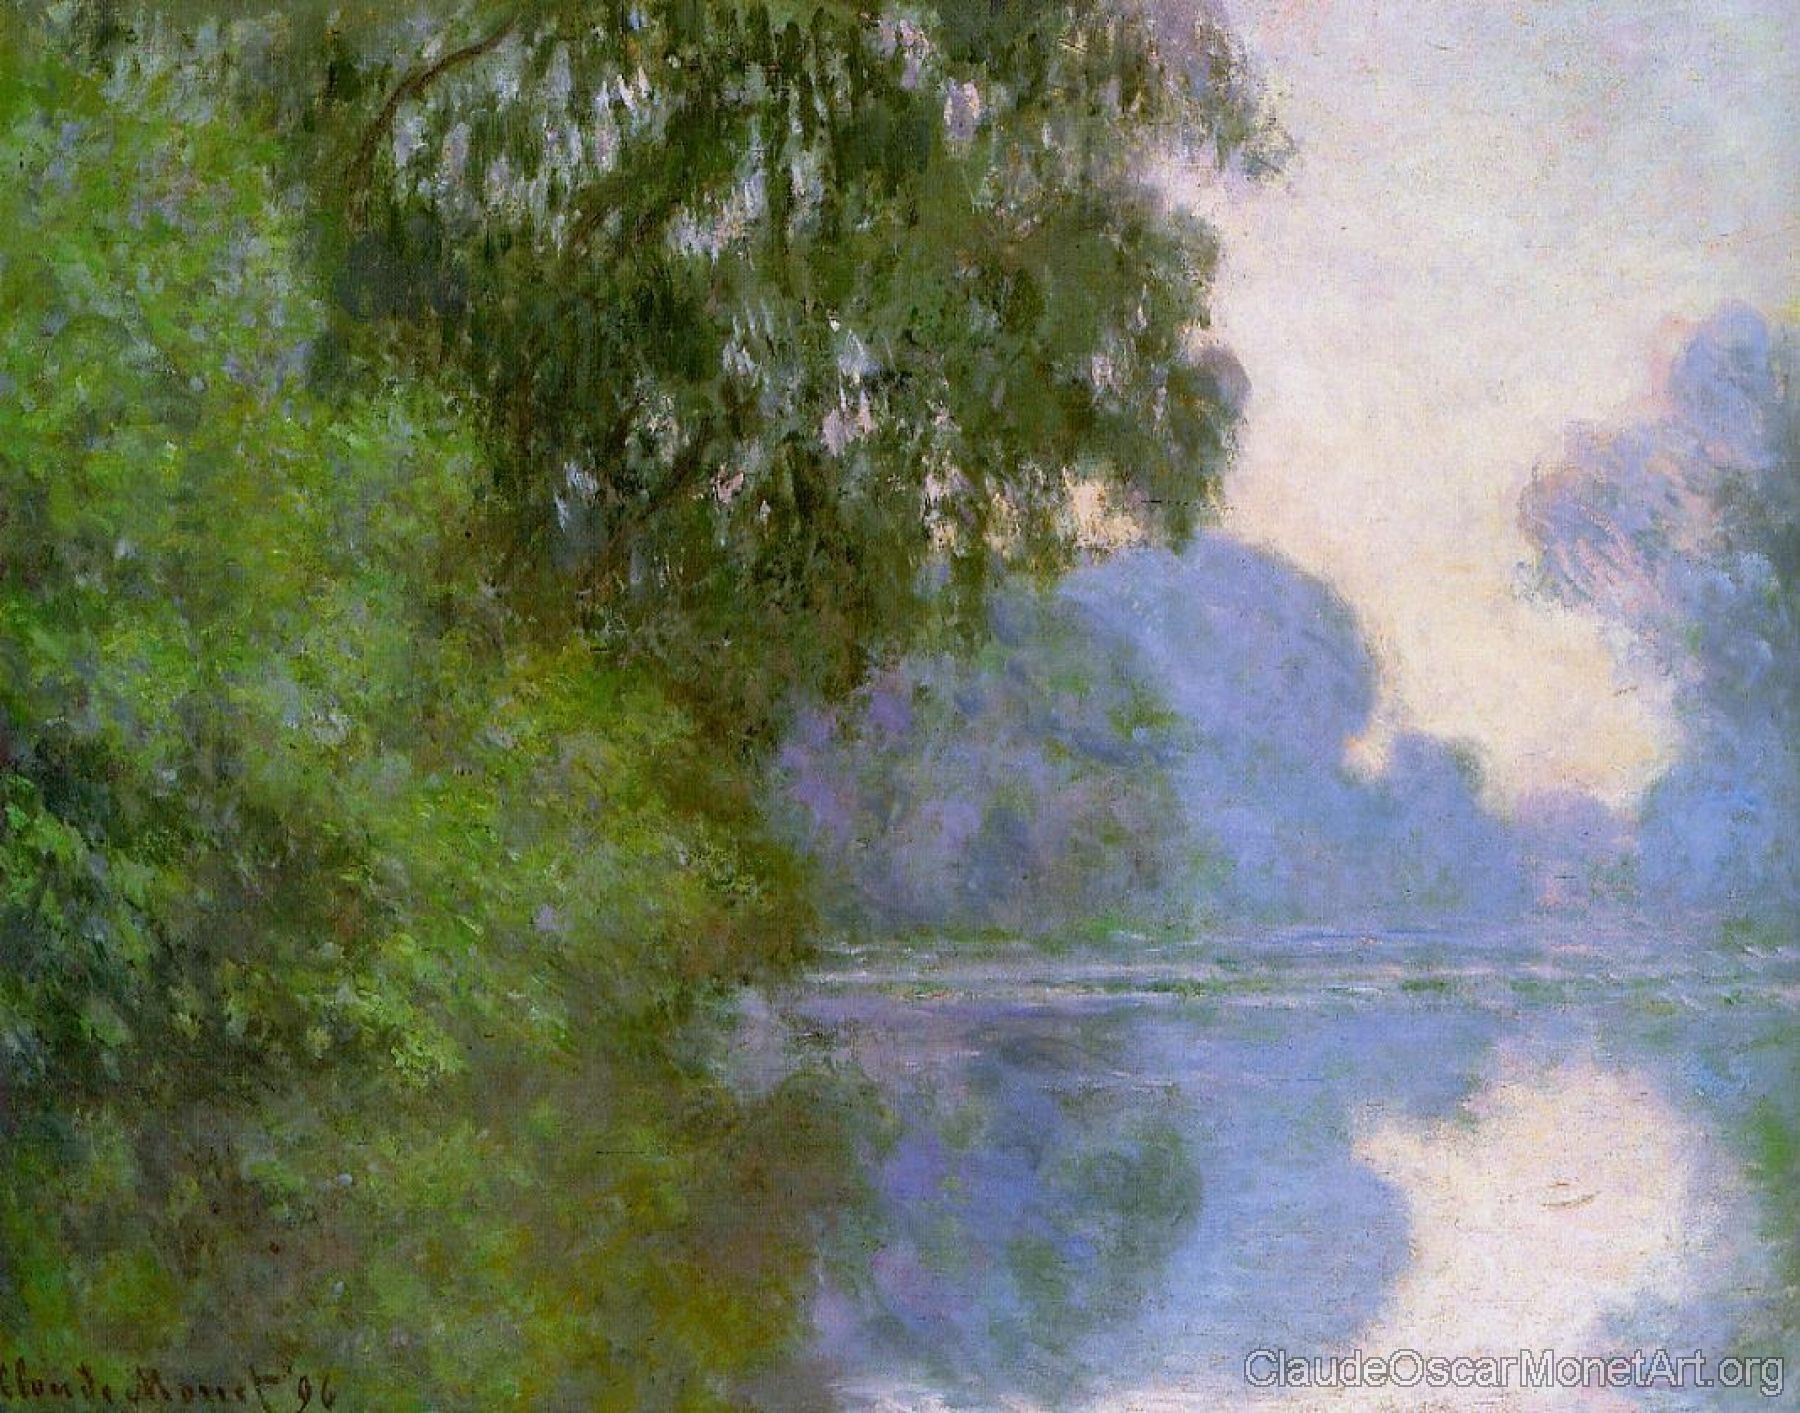 Arm of the Seine near Giverny